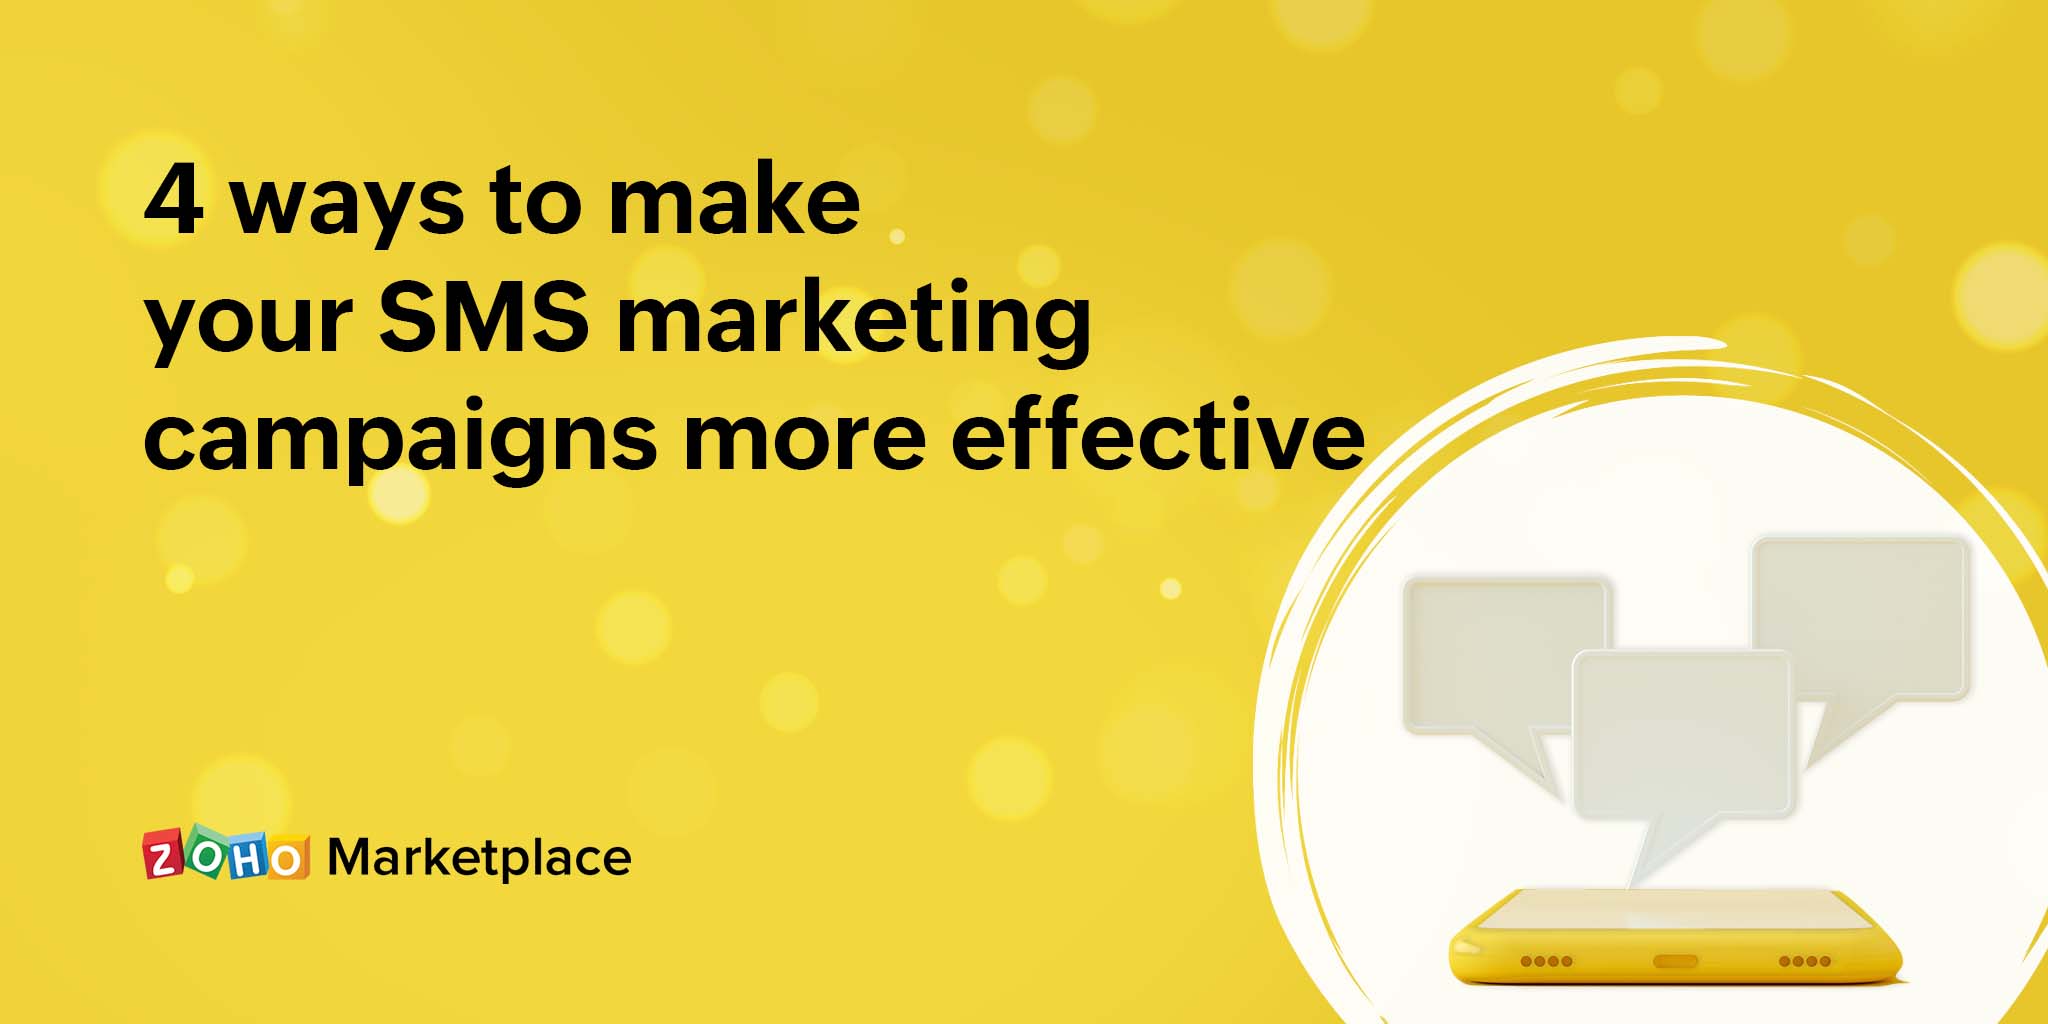 ProTips: 4 ways to make your SMS marketing campaigns more effective